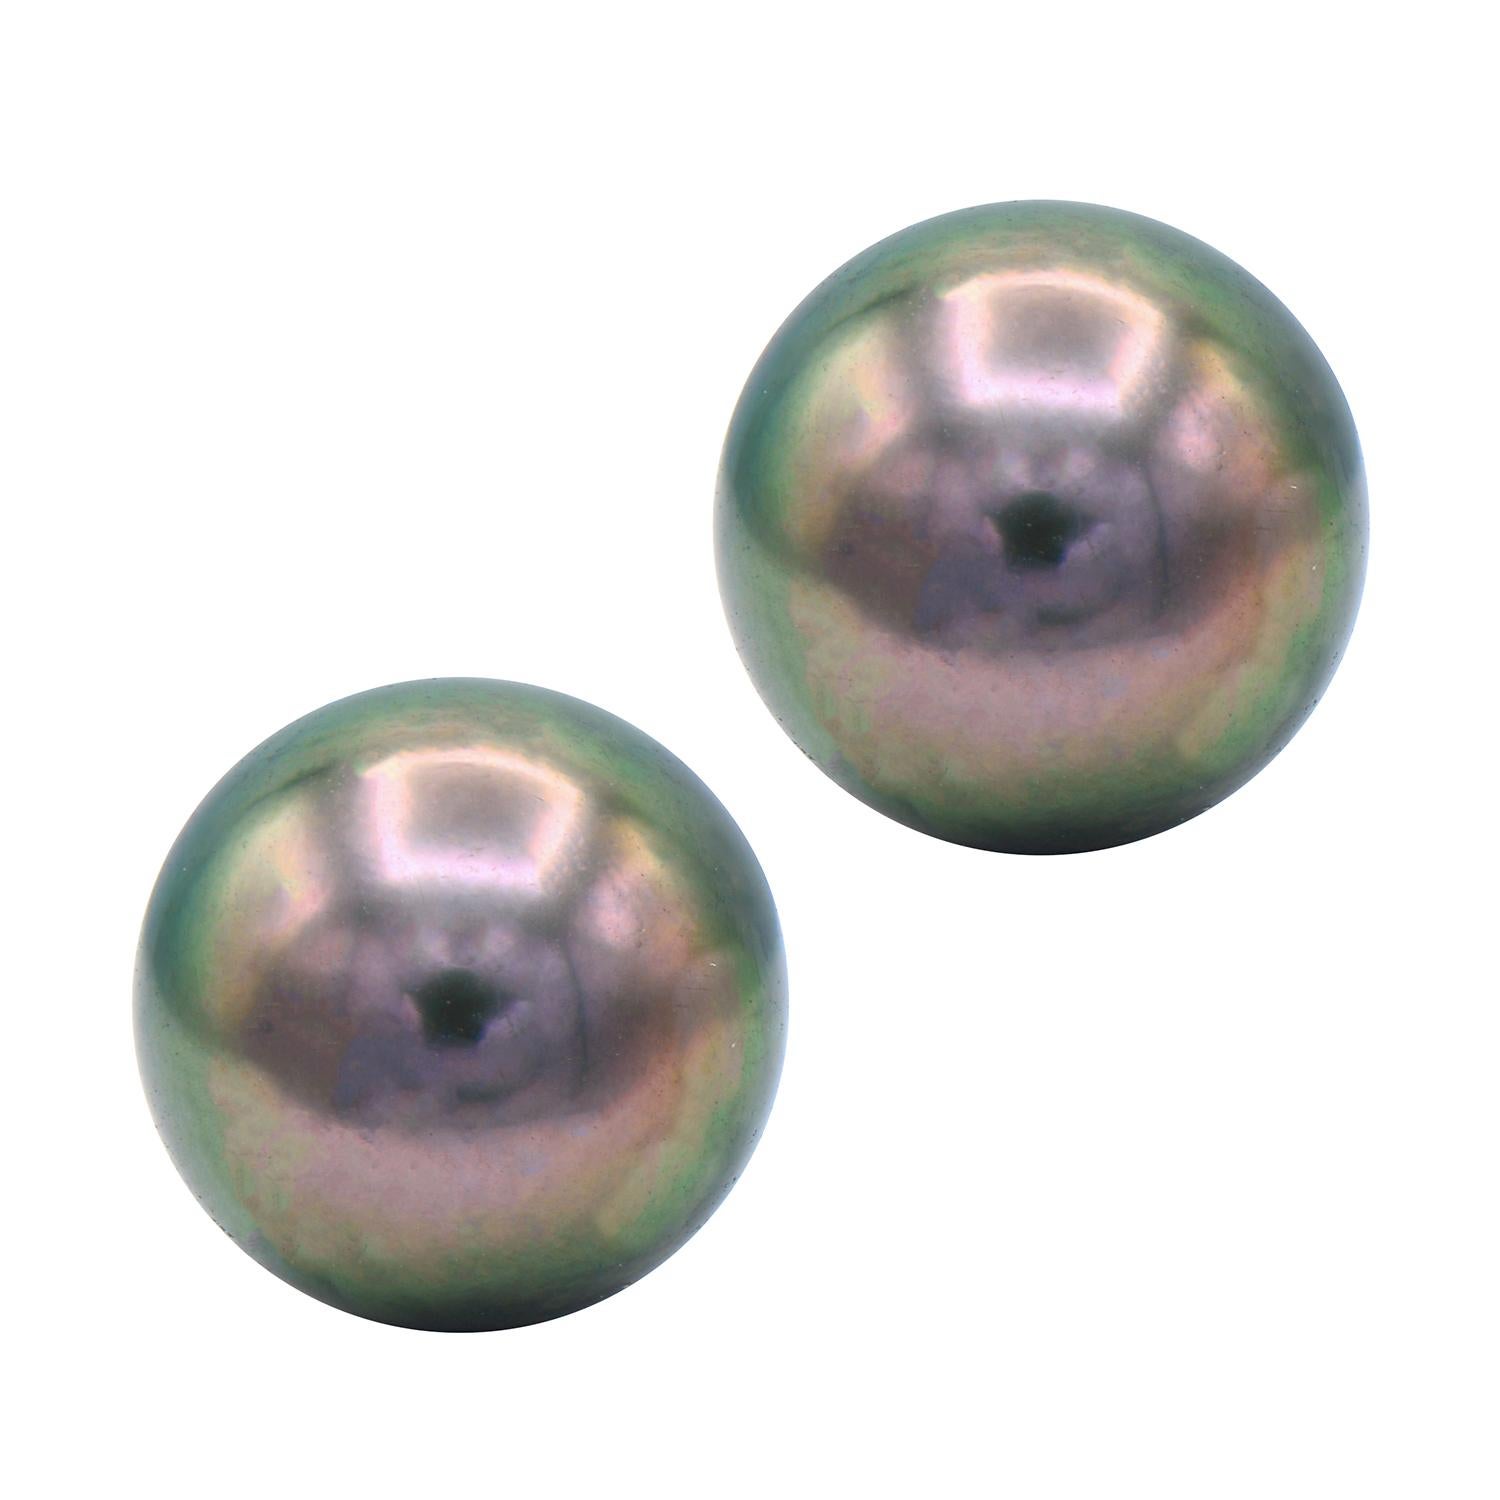 Tahitian Pearl Studs give a little twist to the classic white pearl studs. The Tahitian Pearl Studs are expertly matched in color, luster, and size to make a perfect pair. These 8.5-9mm beautiful pearls are set in 14 karat white gold.